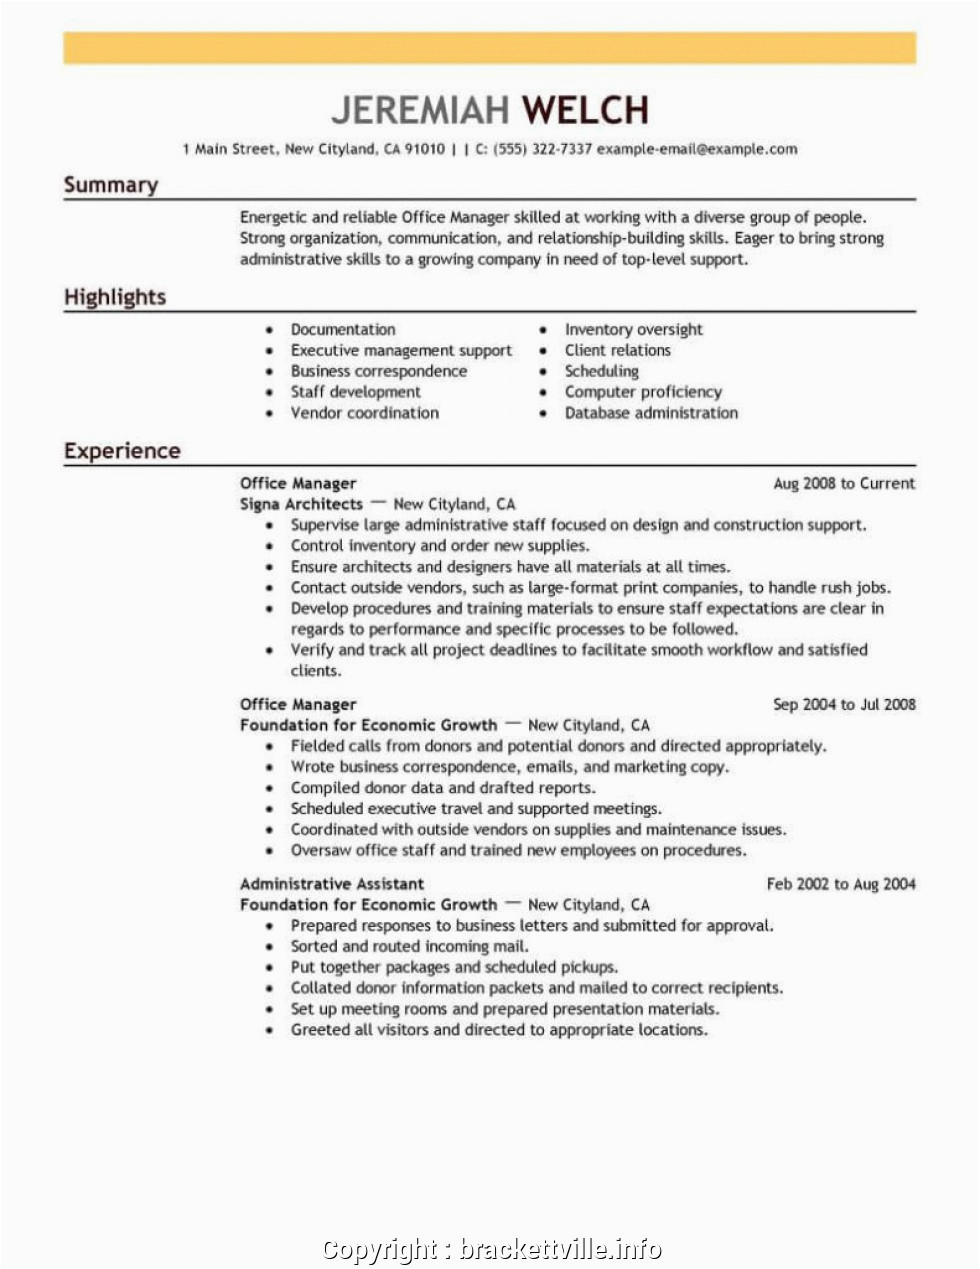 Law Firm Office Manager Resume Sample Modern Legal Fice Manager Resume Unique Sample Fice